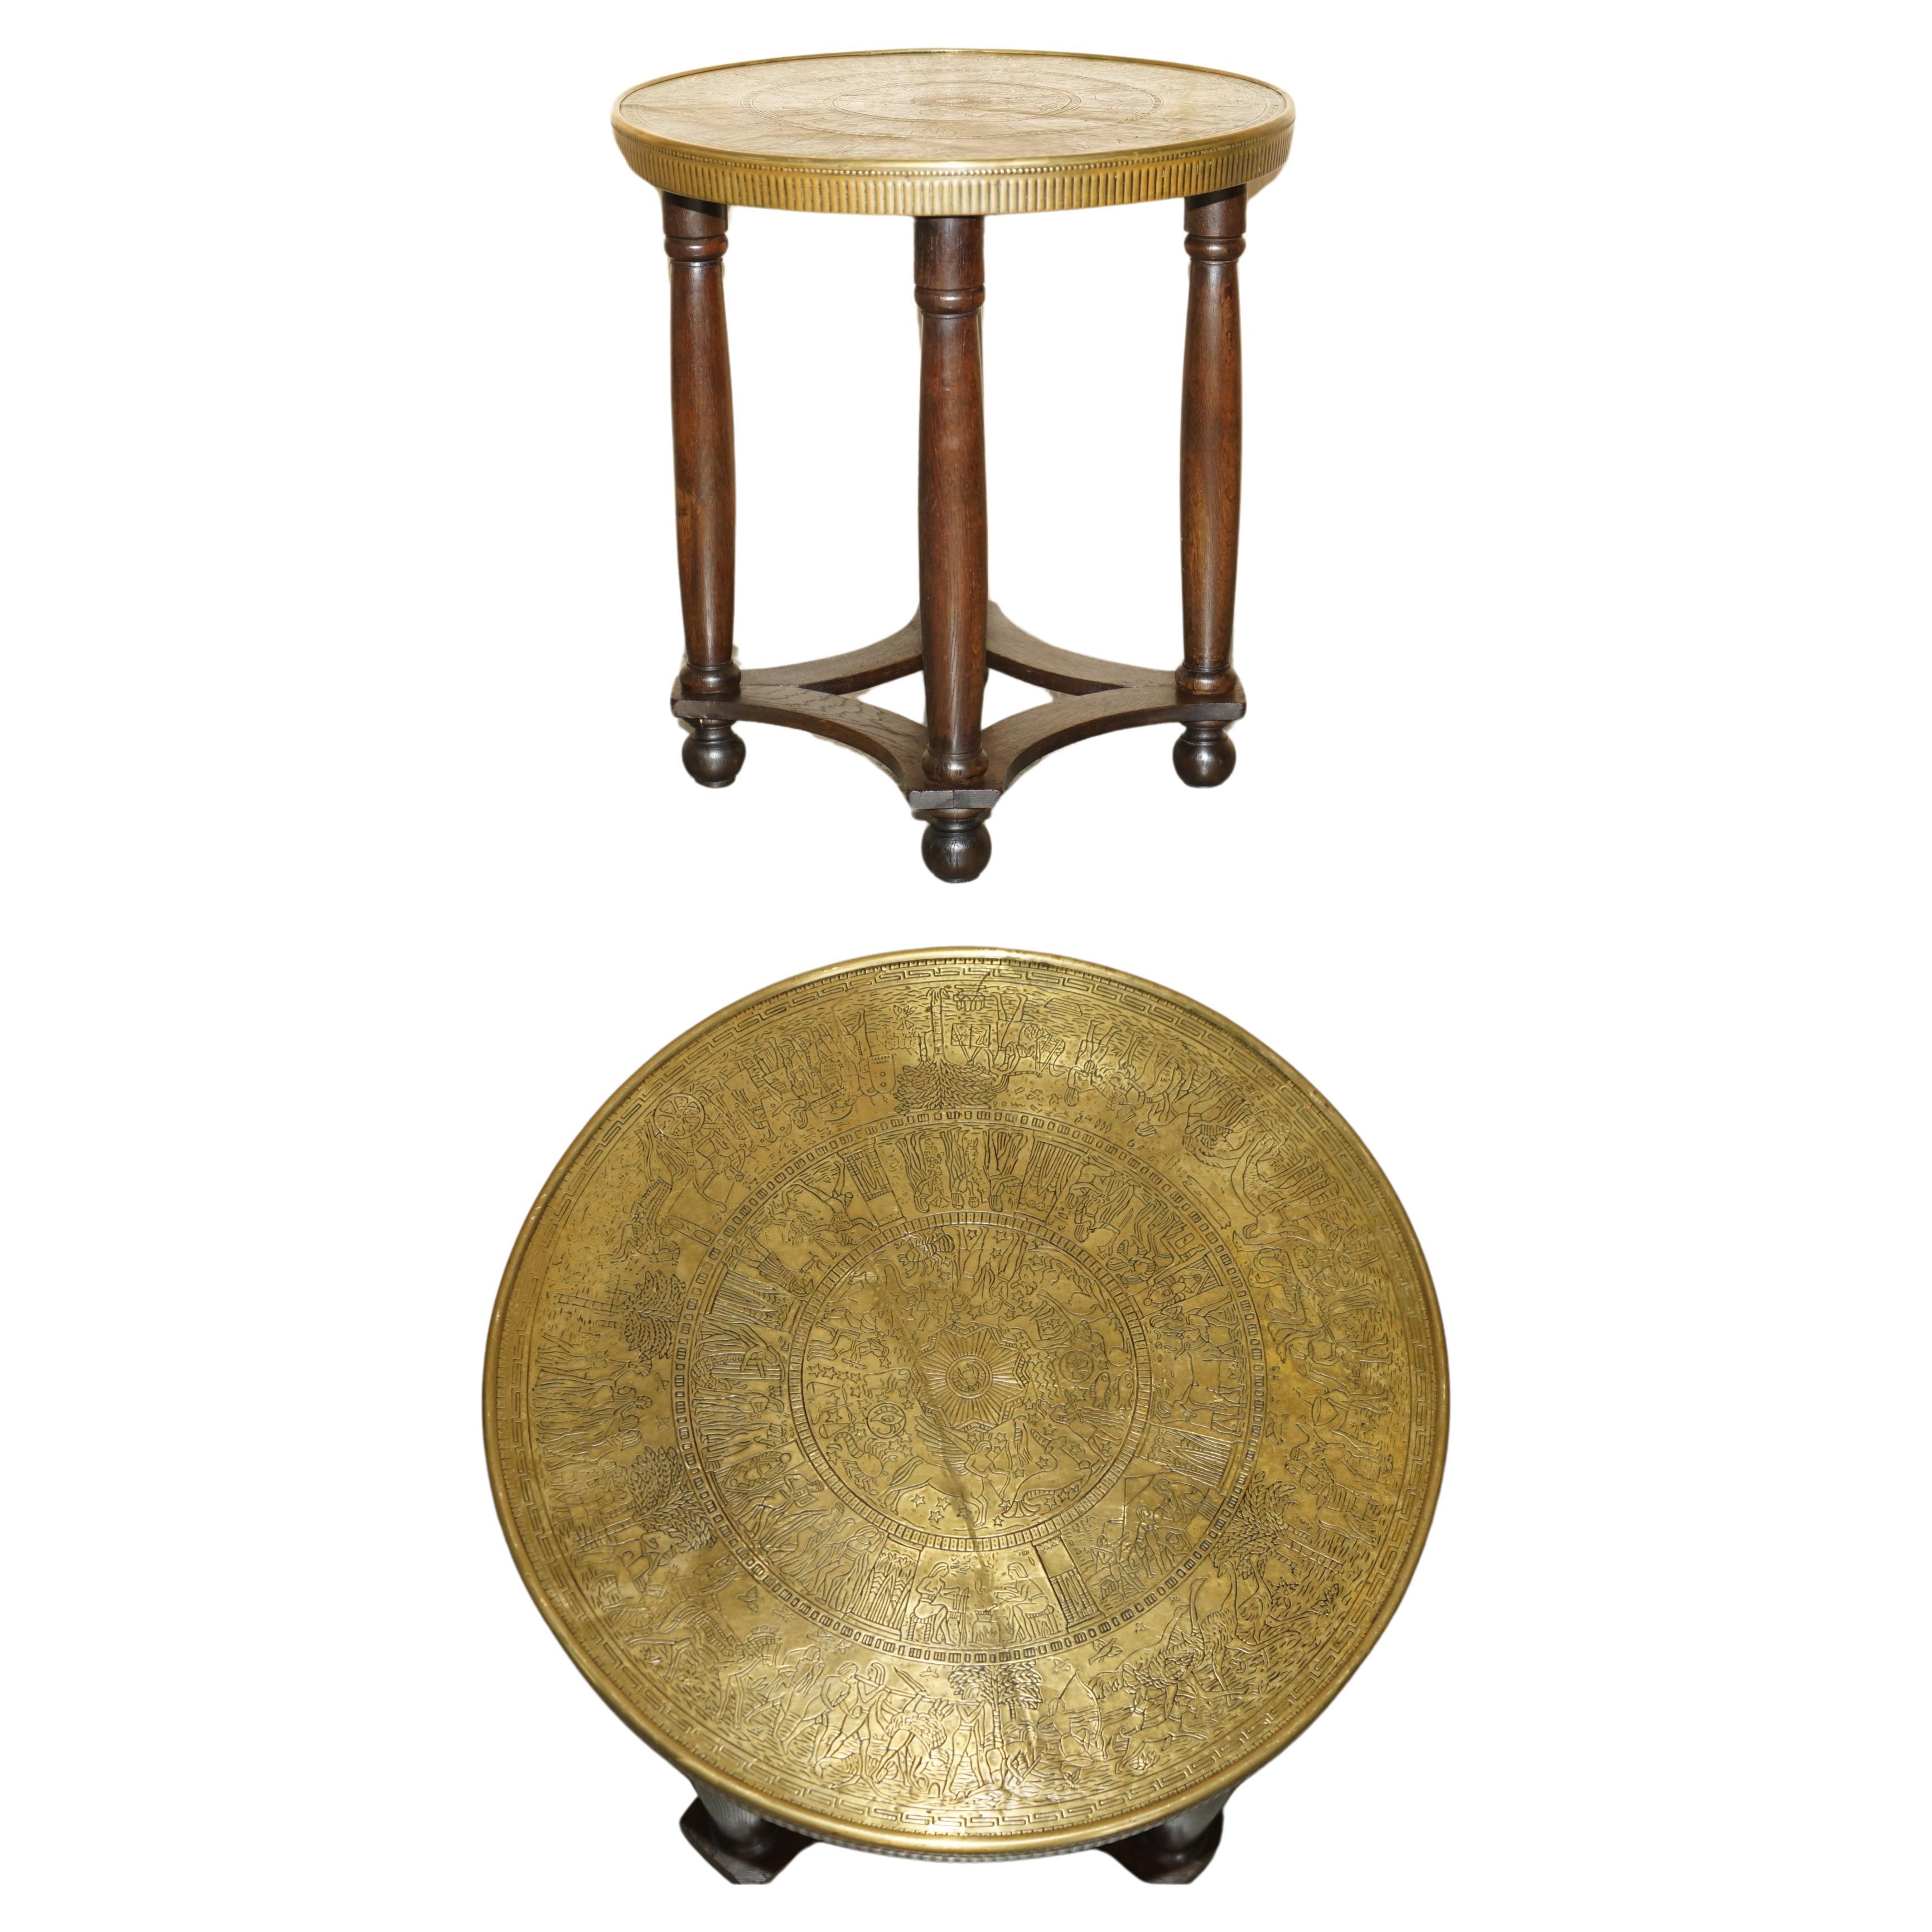 LOVELY ANTIQUE CiRCA 1900 EGYPTIAN BRASS ENGRAVED TOP OCCASIONAL CENTRE TABLE For Sale